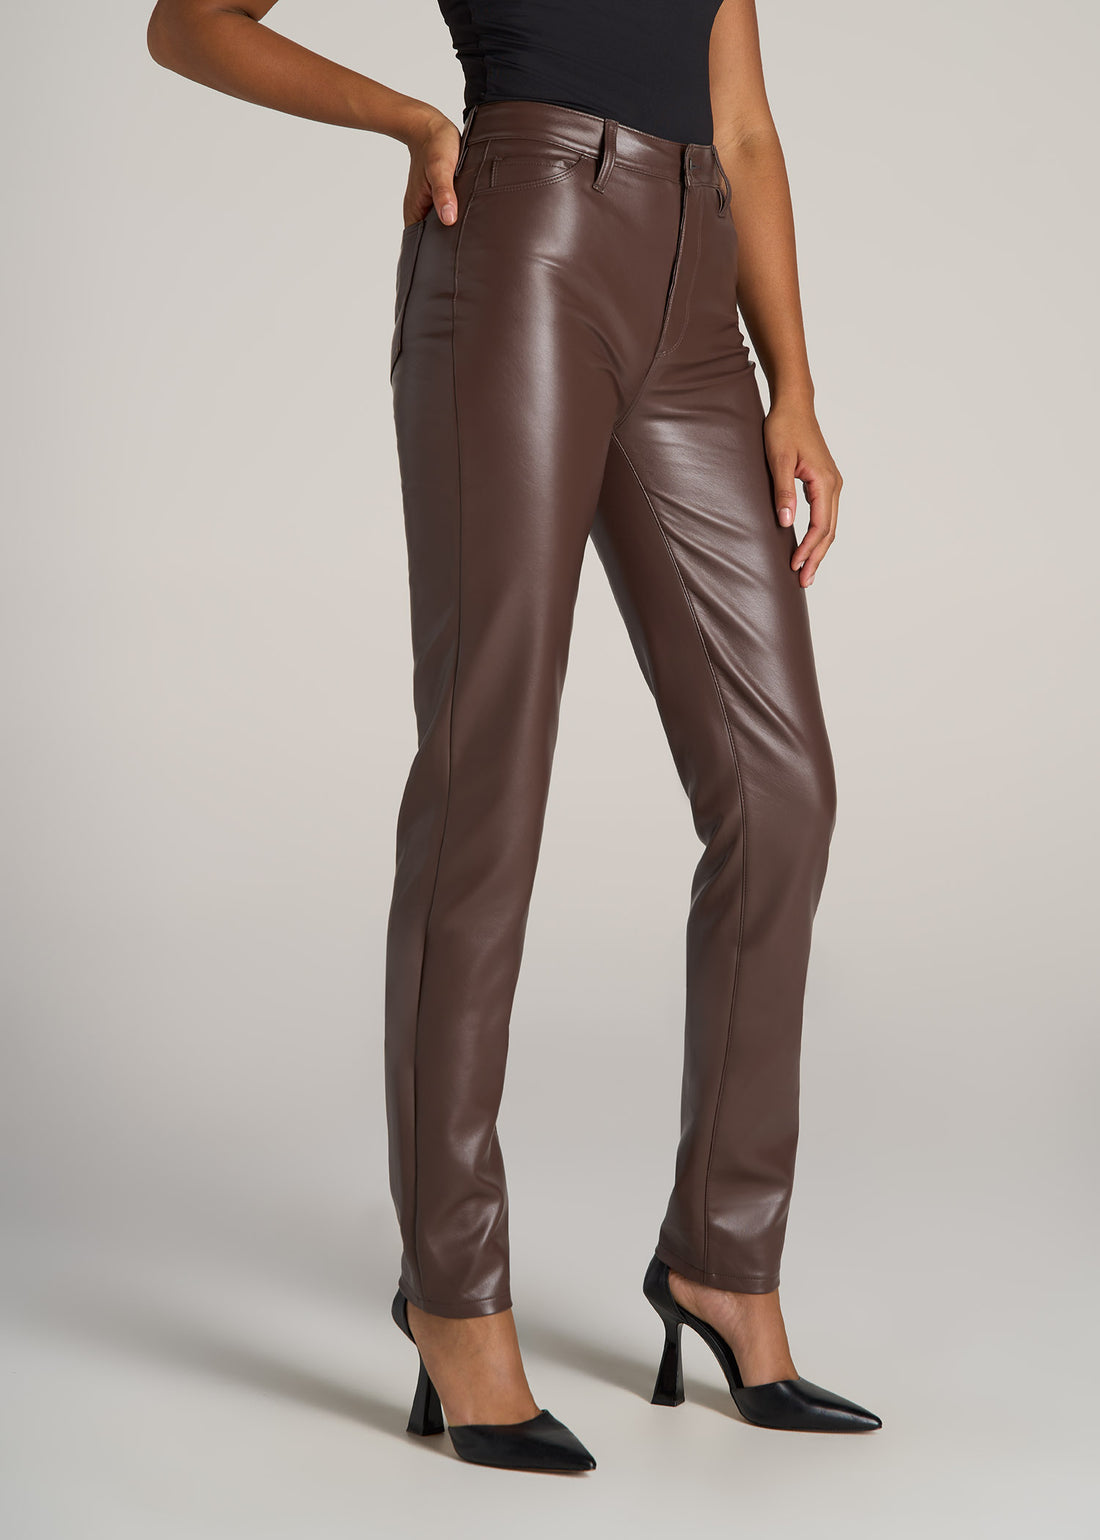 Faux Leather Slim Pants For Tall Women American Tall 4374